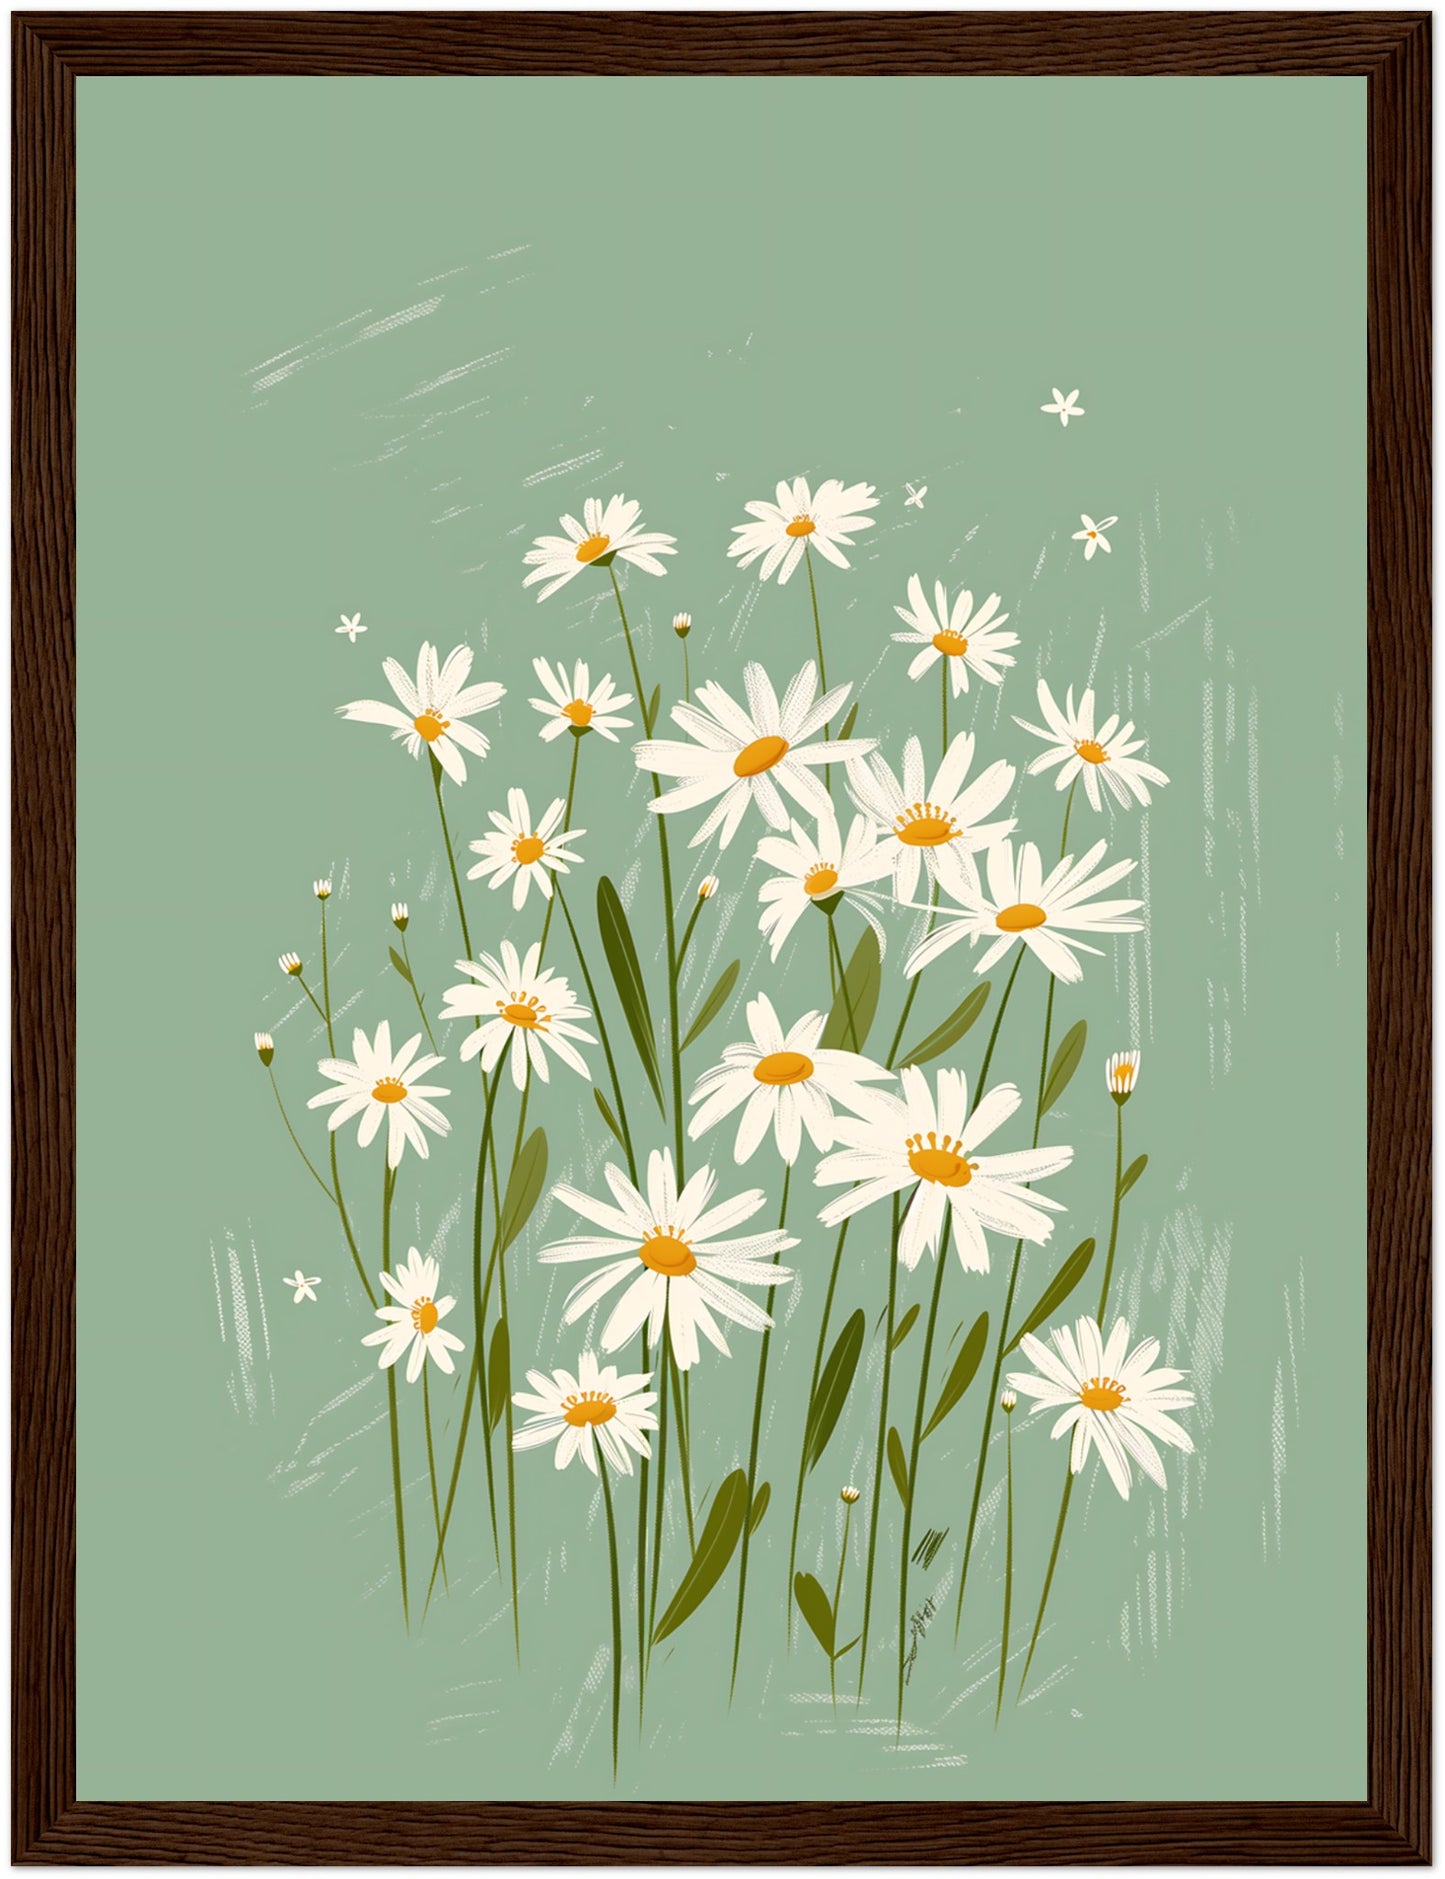 A framed illustration of white daisies with yellow centers on a teal background.